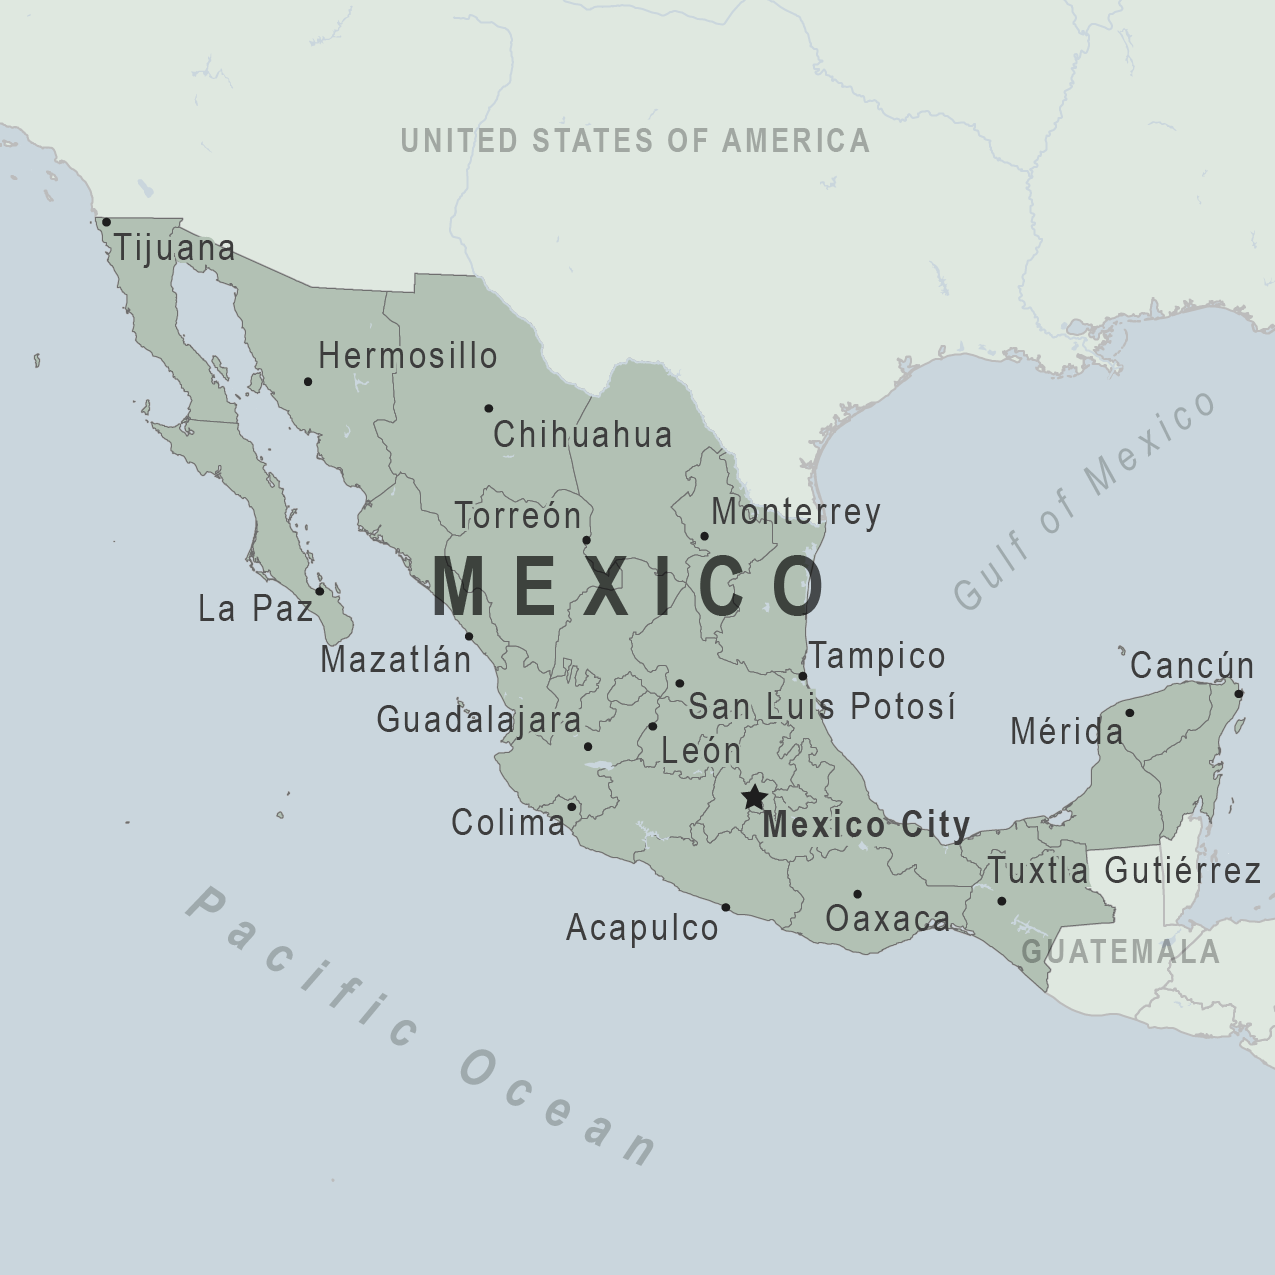 Traveling To Mexico: Entry Requirements And Advisory Information